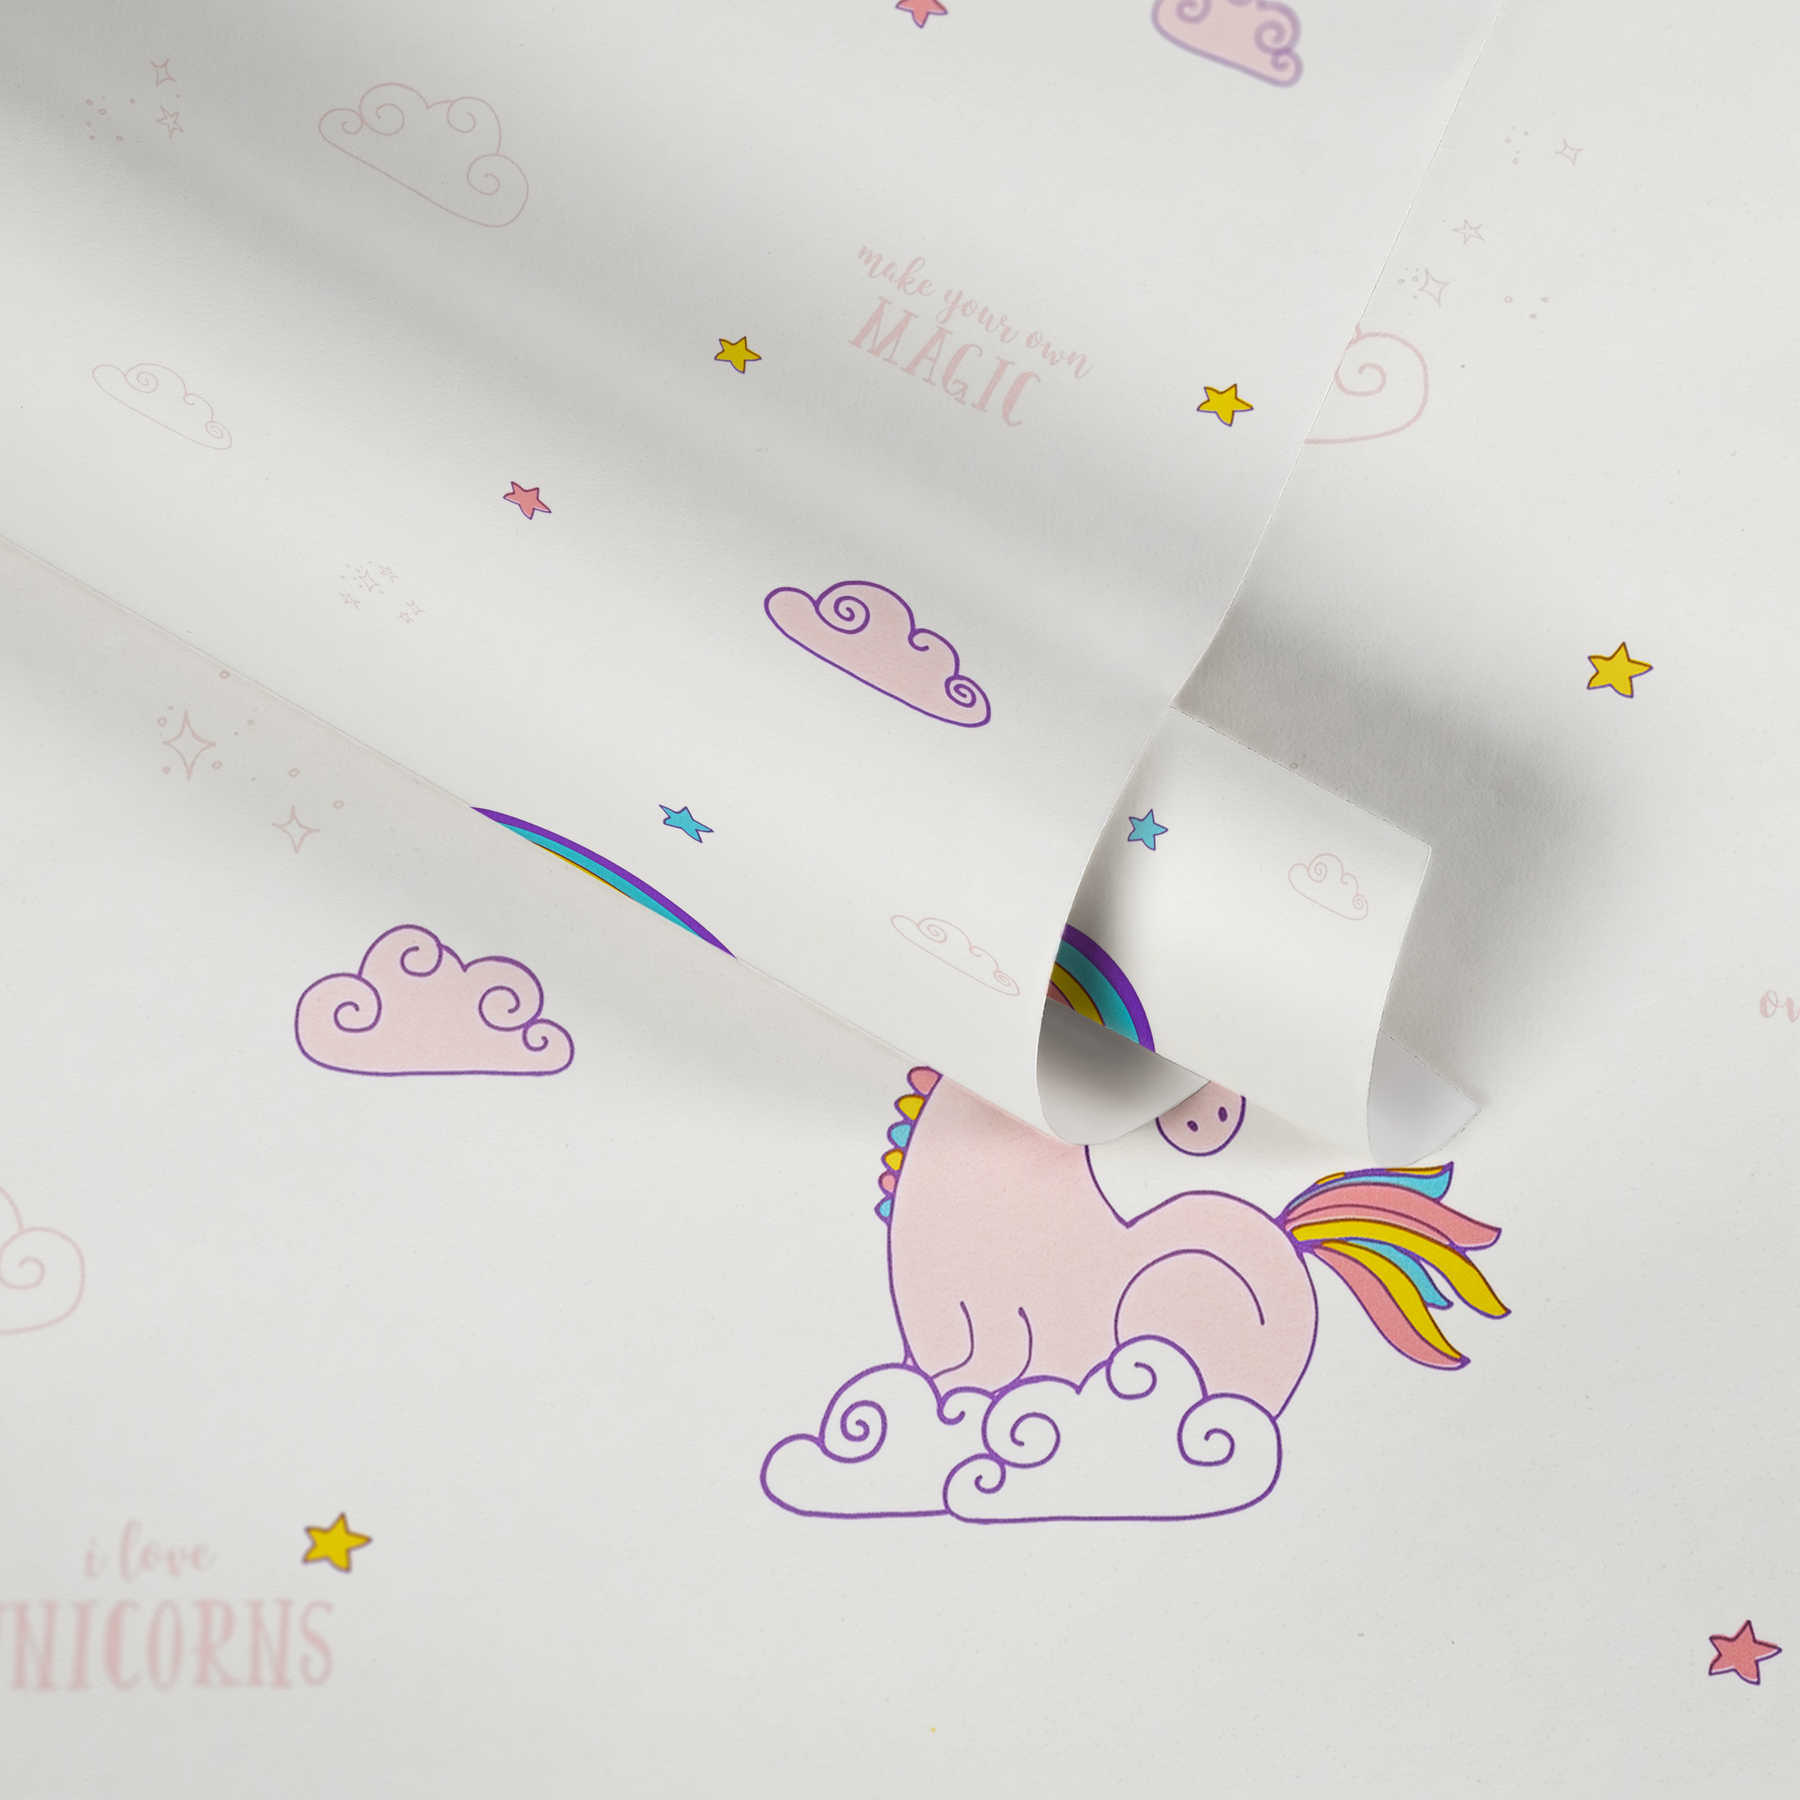             Wallpaper with unicorn, rainbow & clouds- Colorful, purple
        